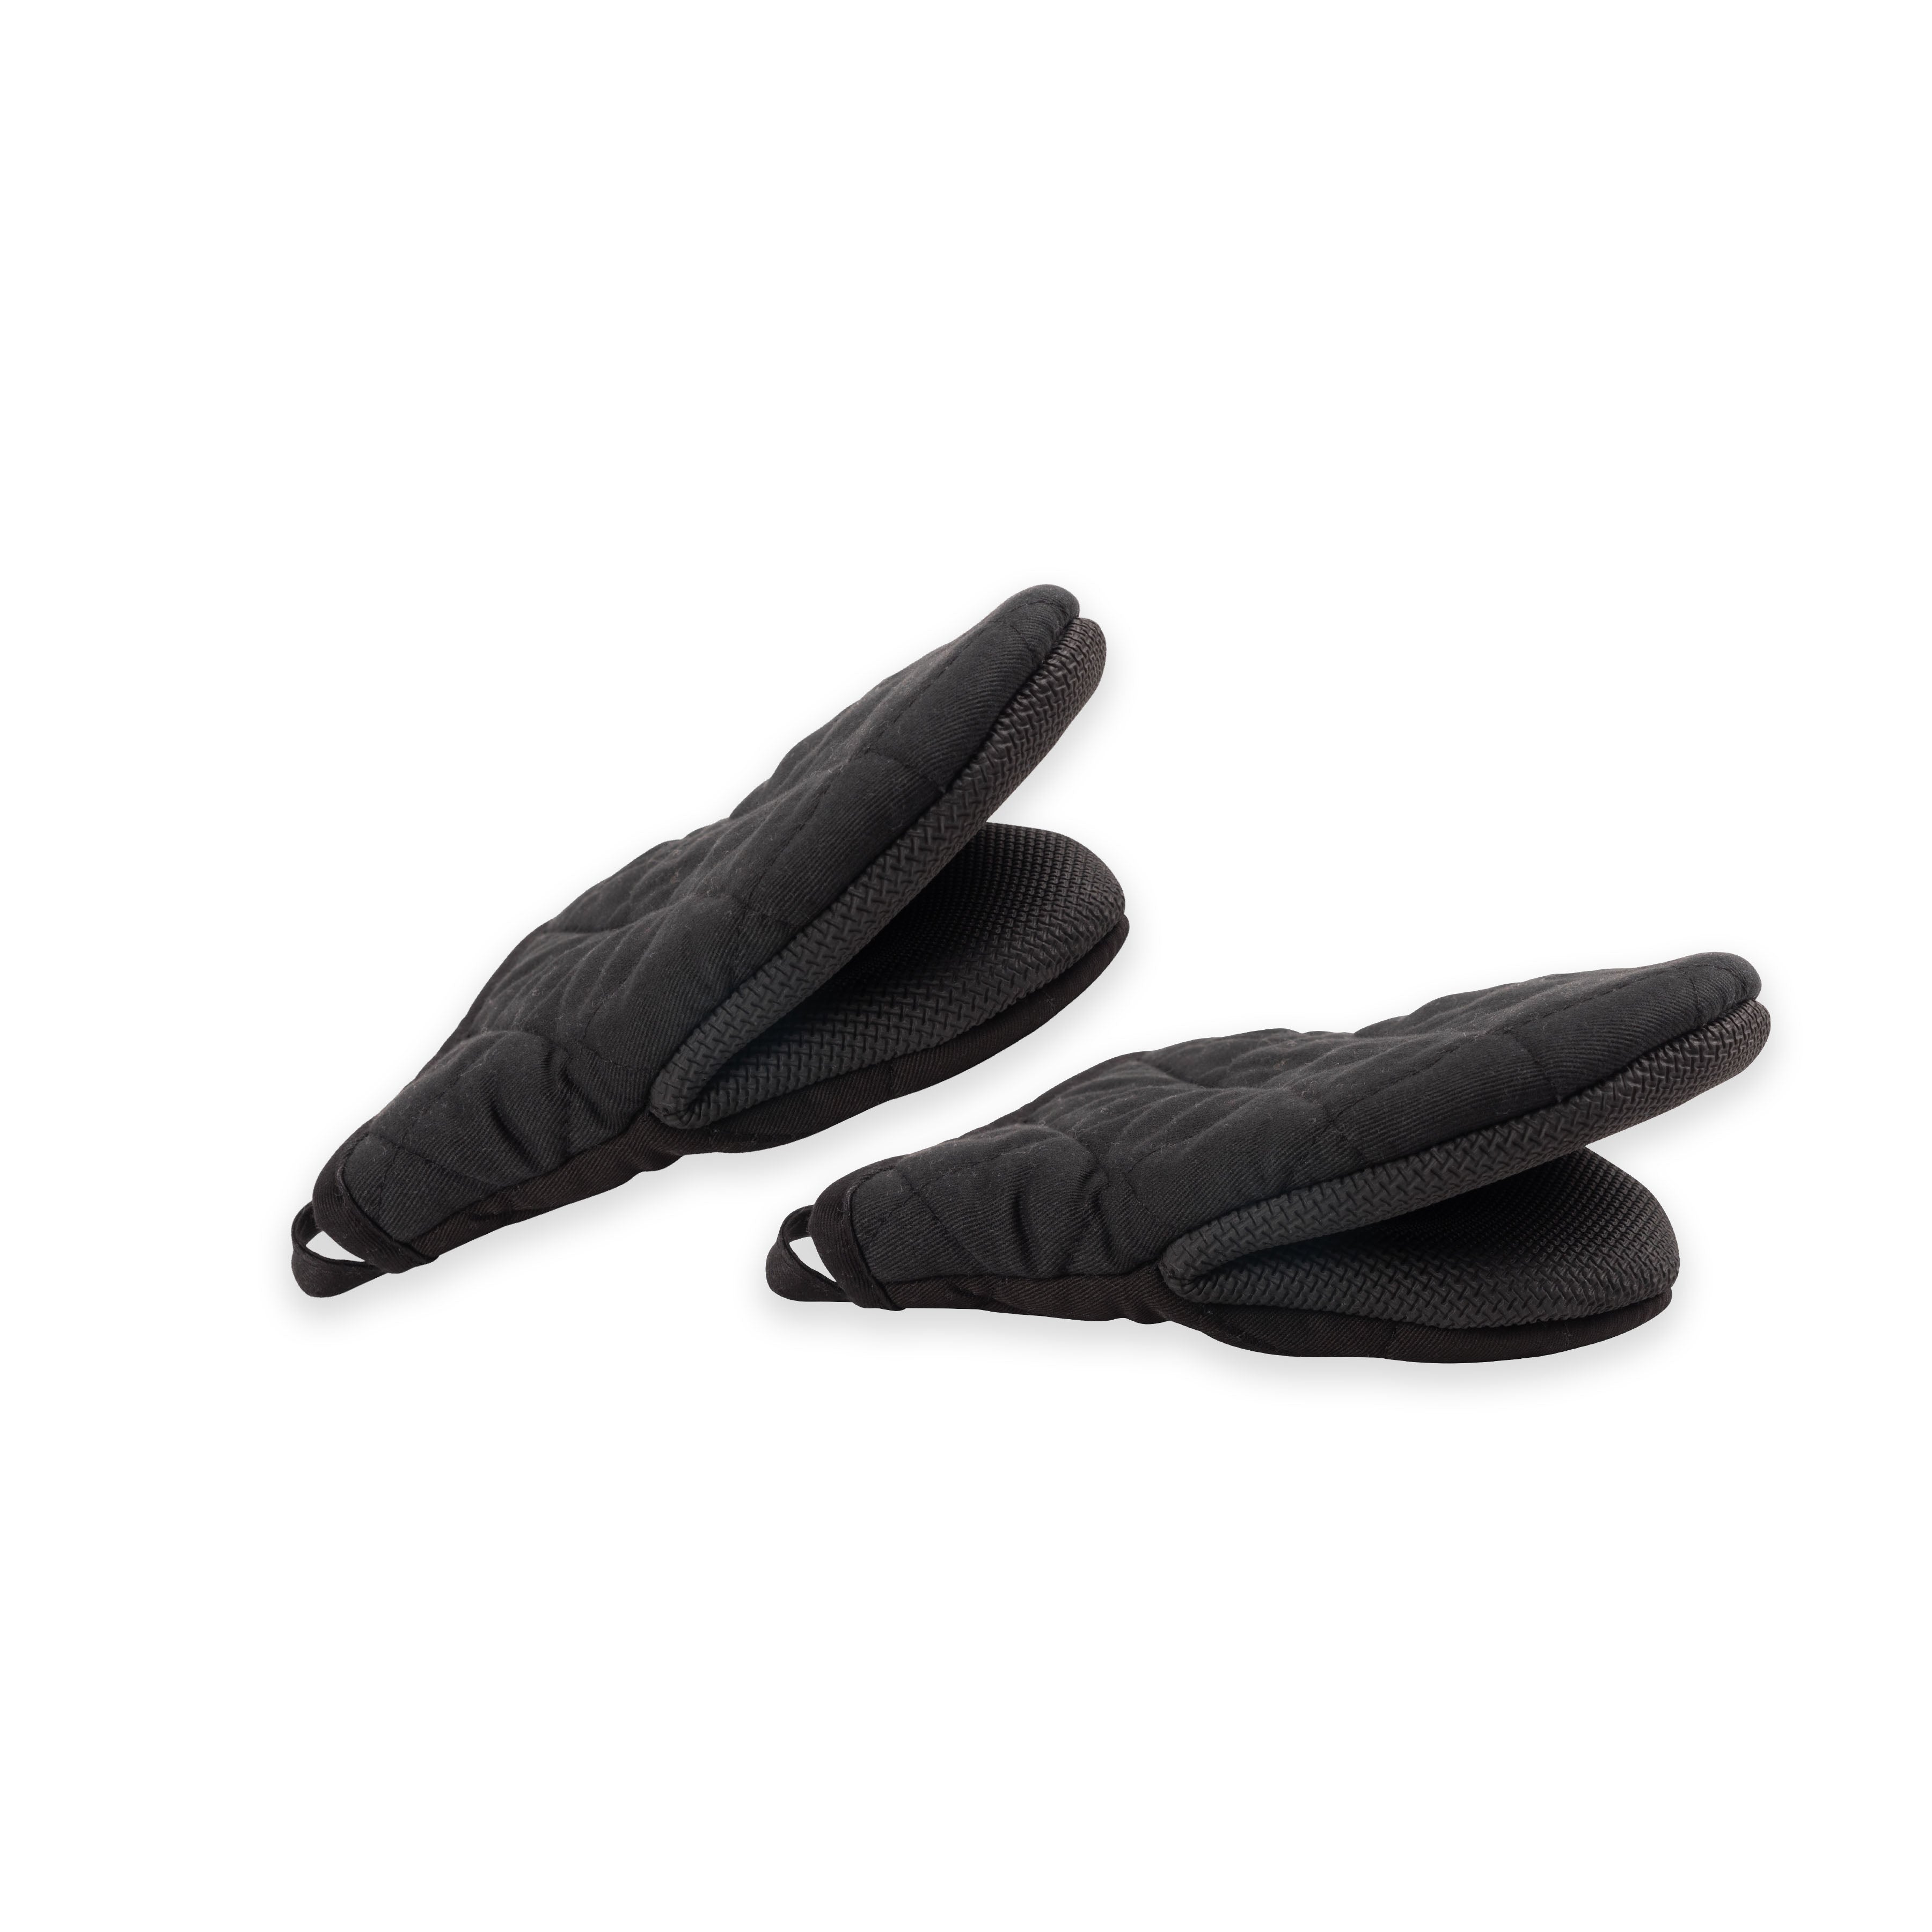 Cook's Tools Pantry Oven Mini Mitts - Set of 2 - Black